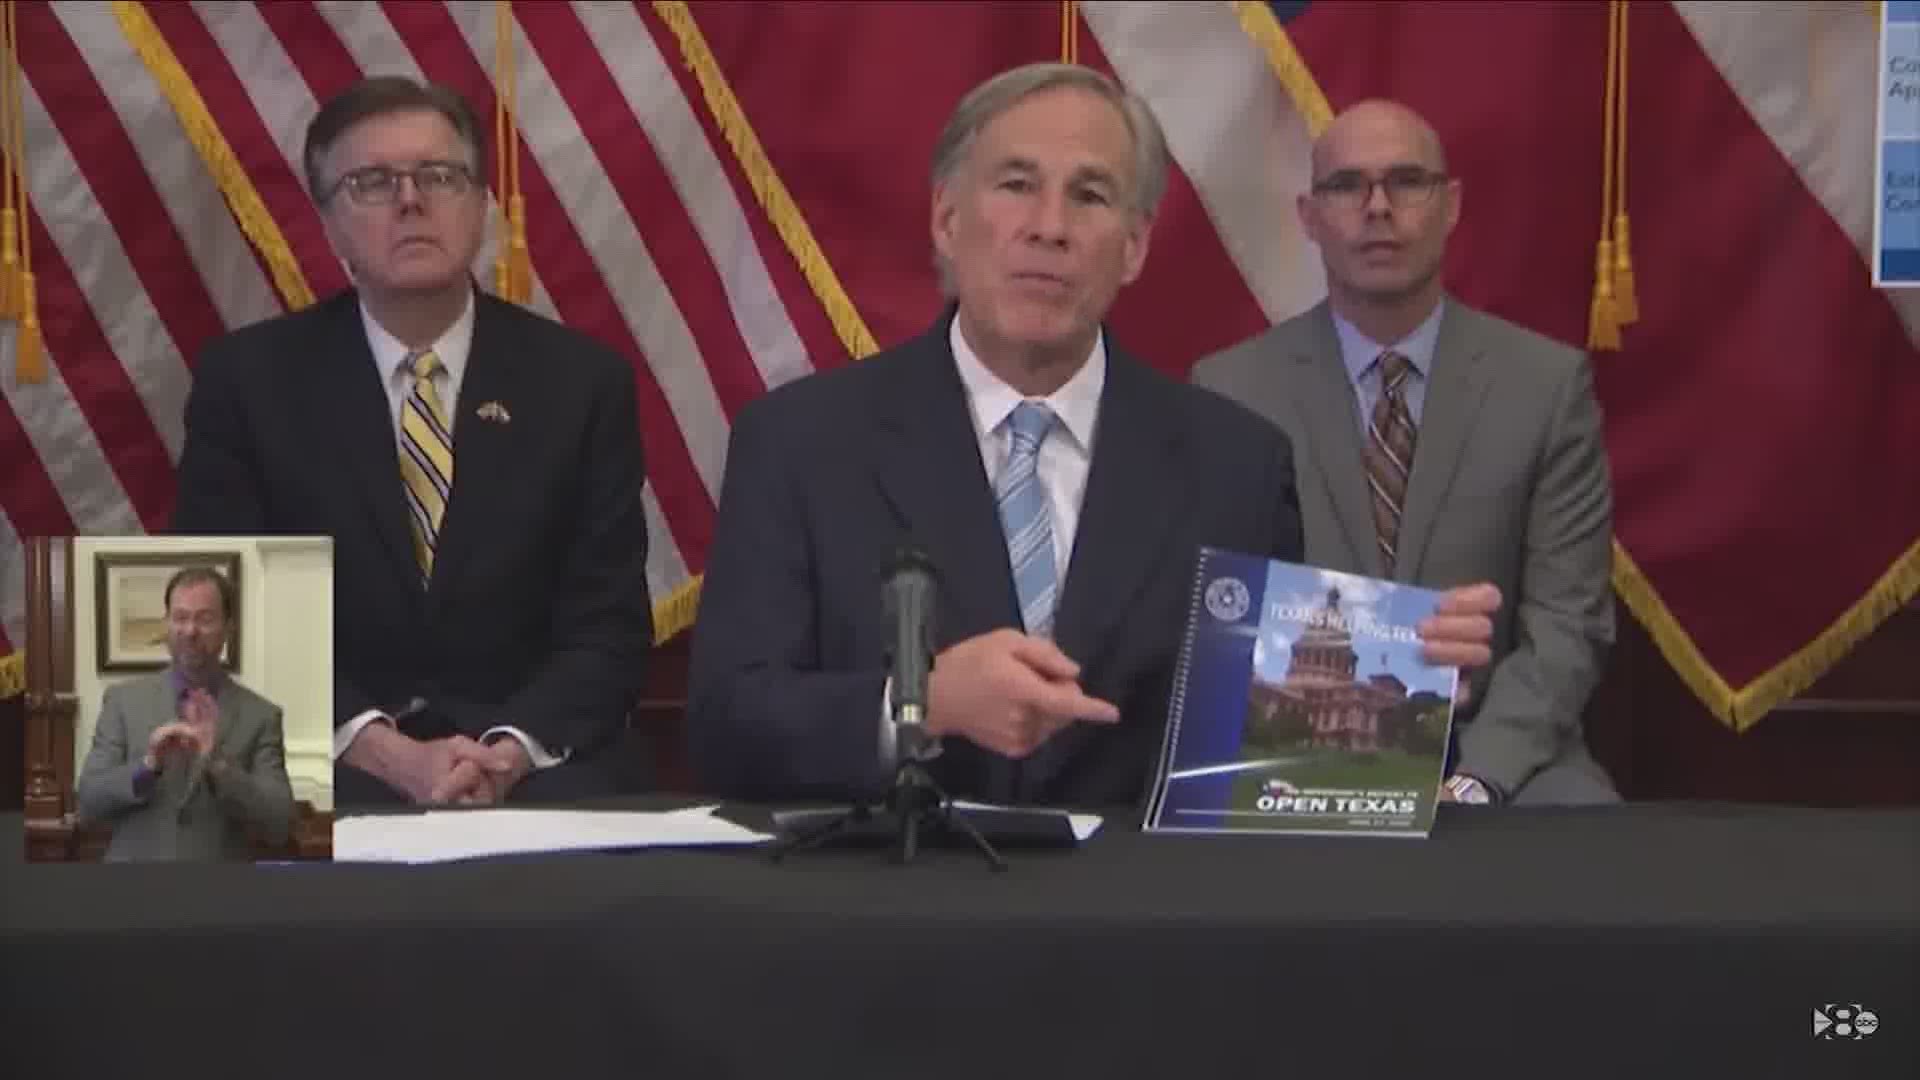 "This is permission to open, not a requirement," Gov. Abbott said Monday.